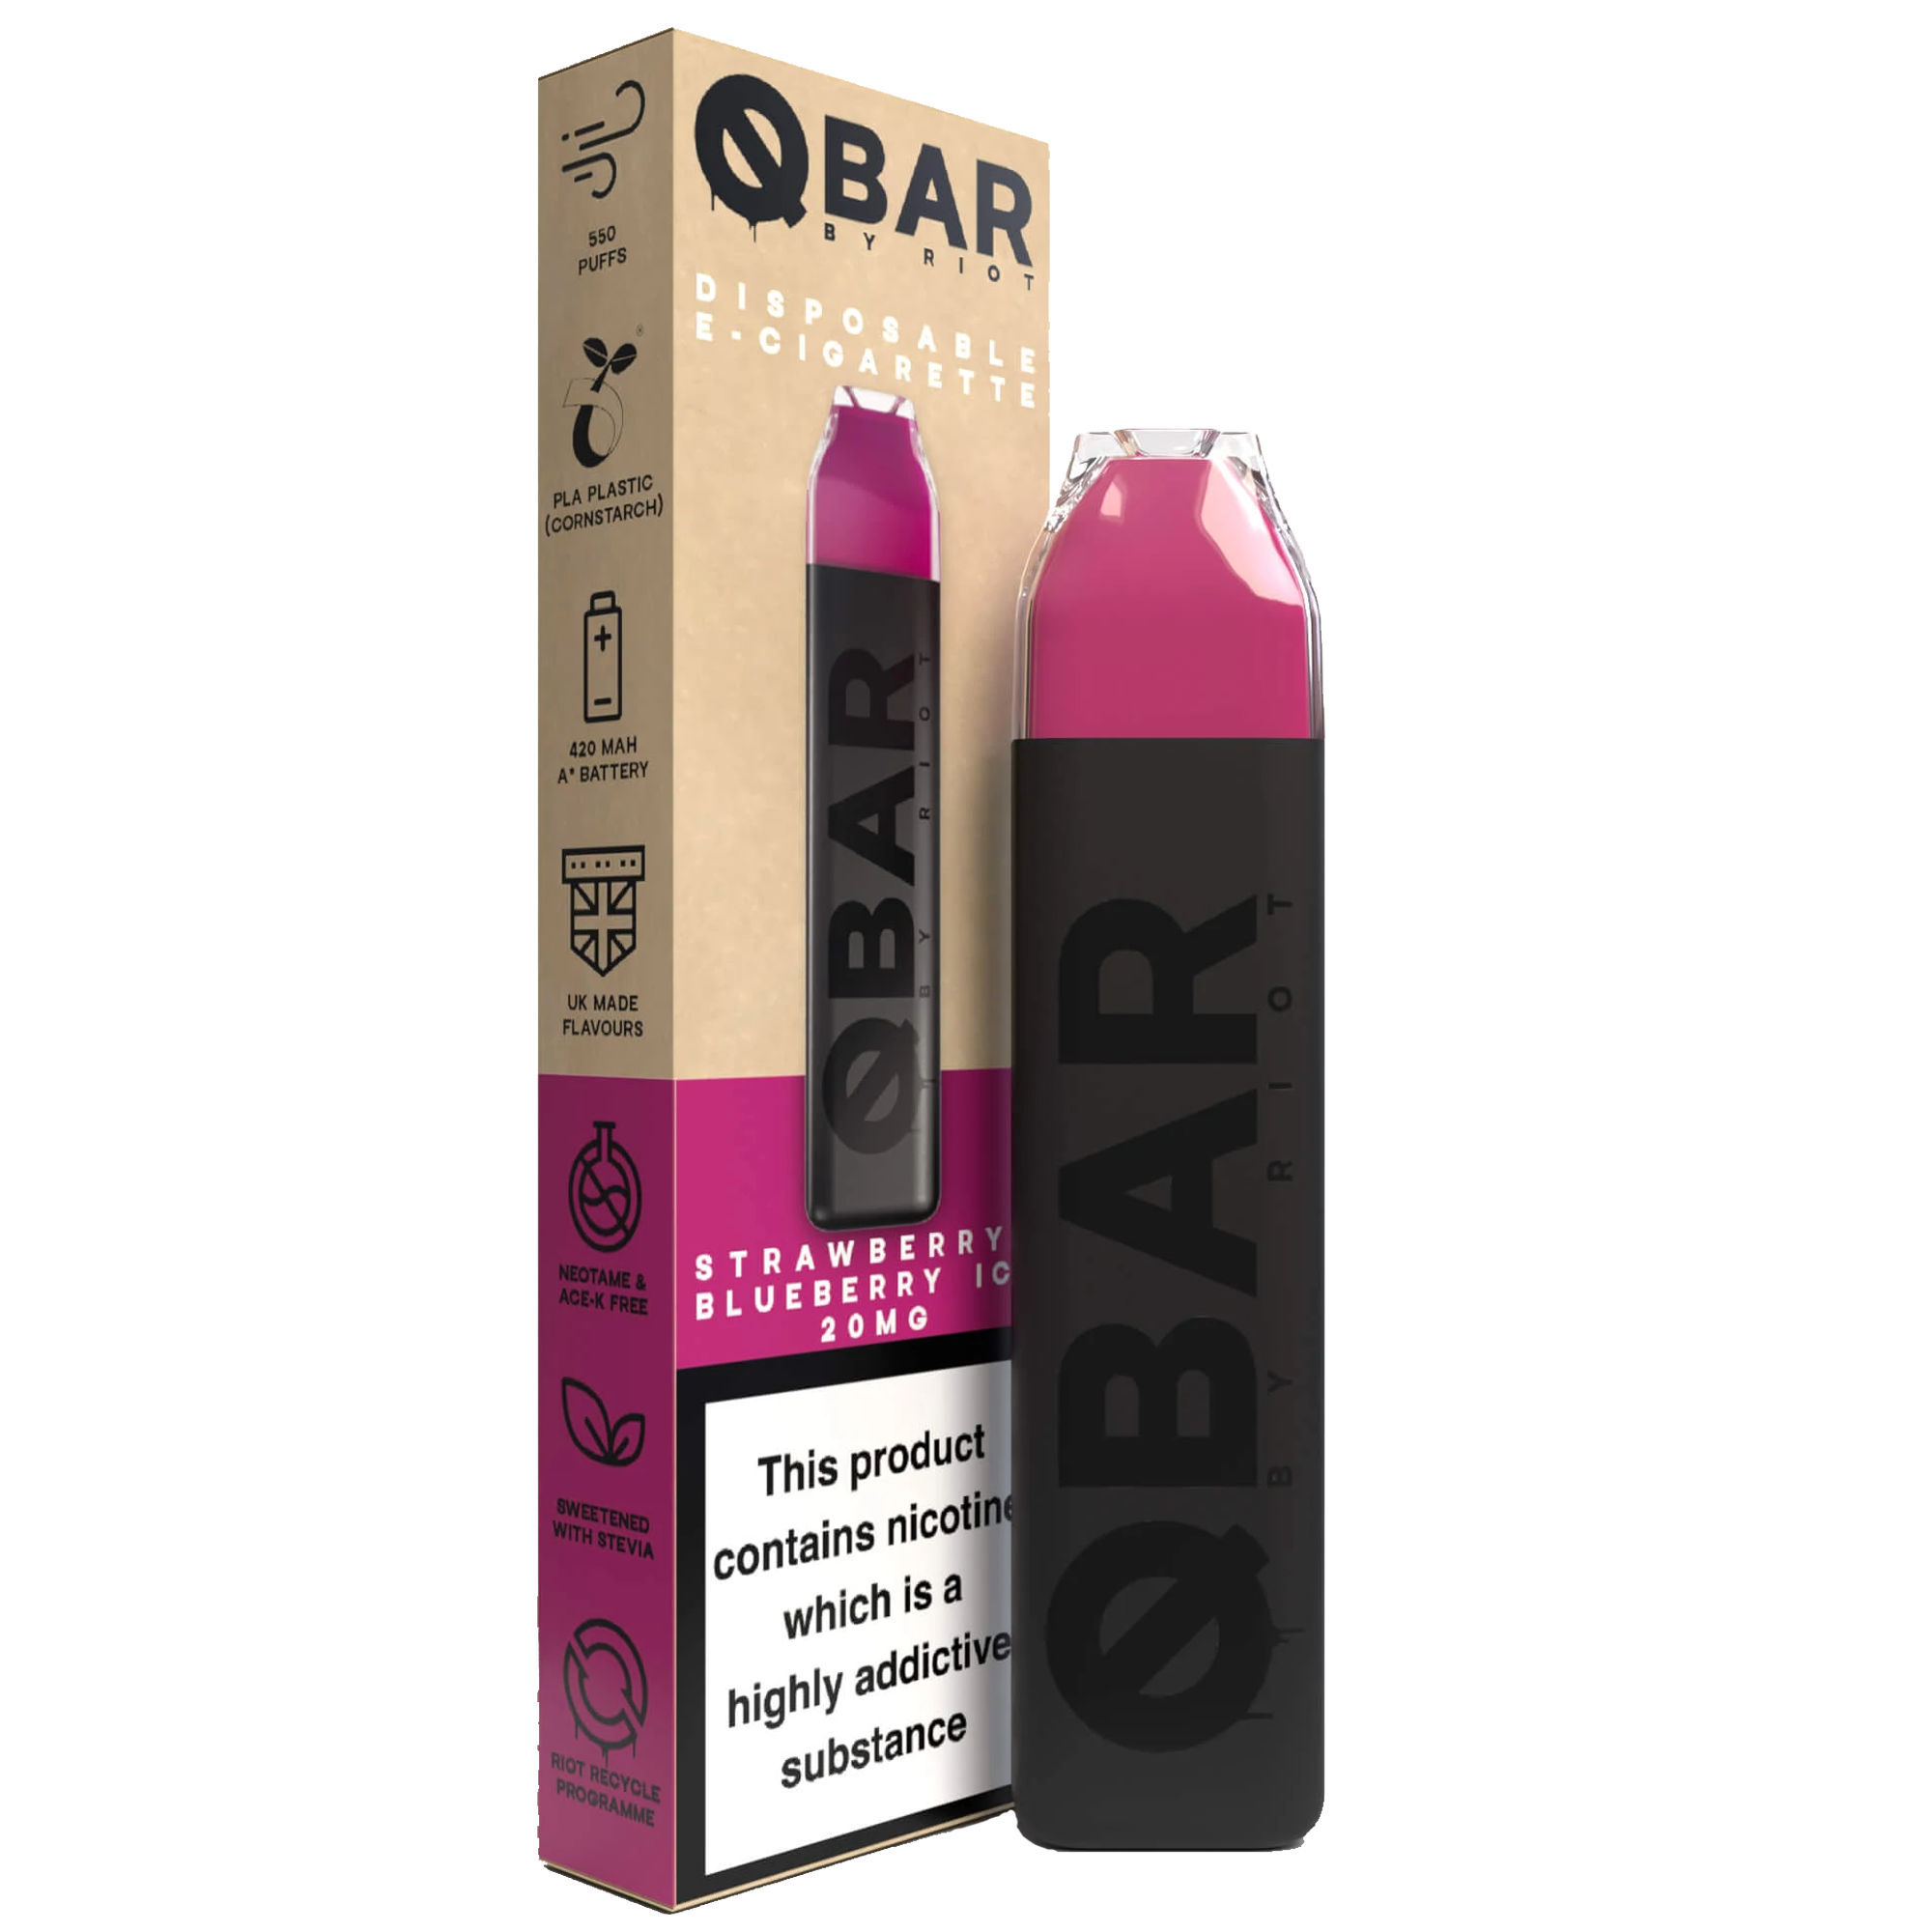 Riot Squad Q Bar Disposable Vape Device-Strawberry & Blueberry Ice